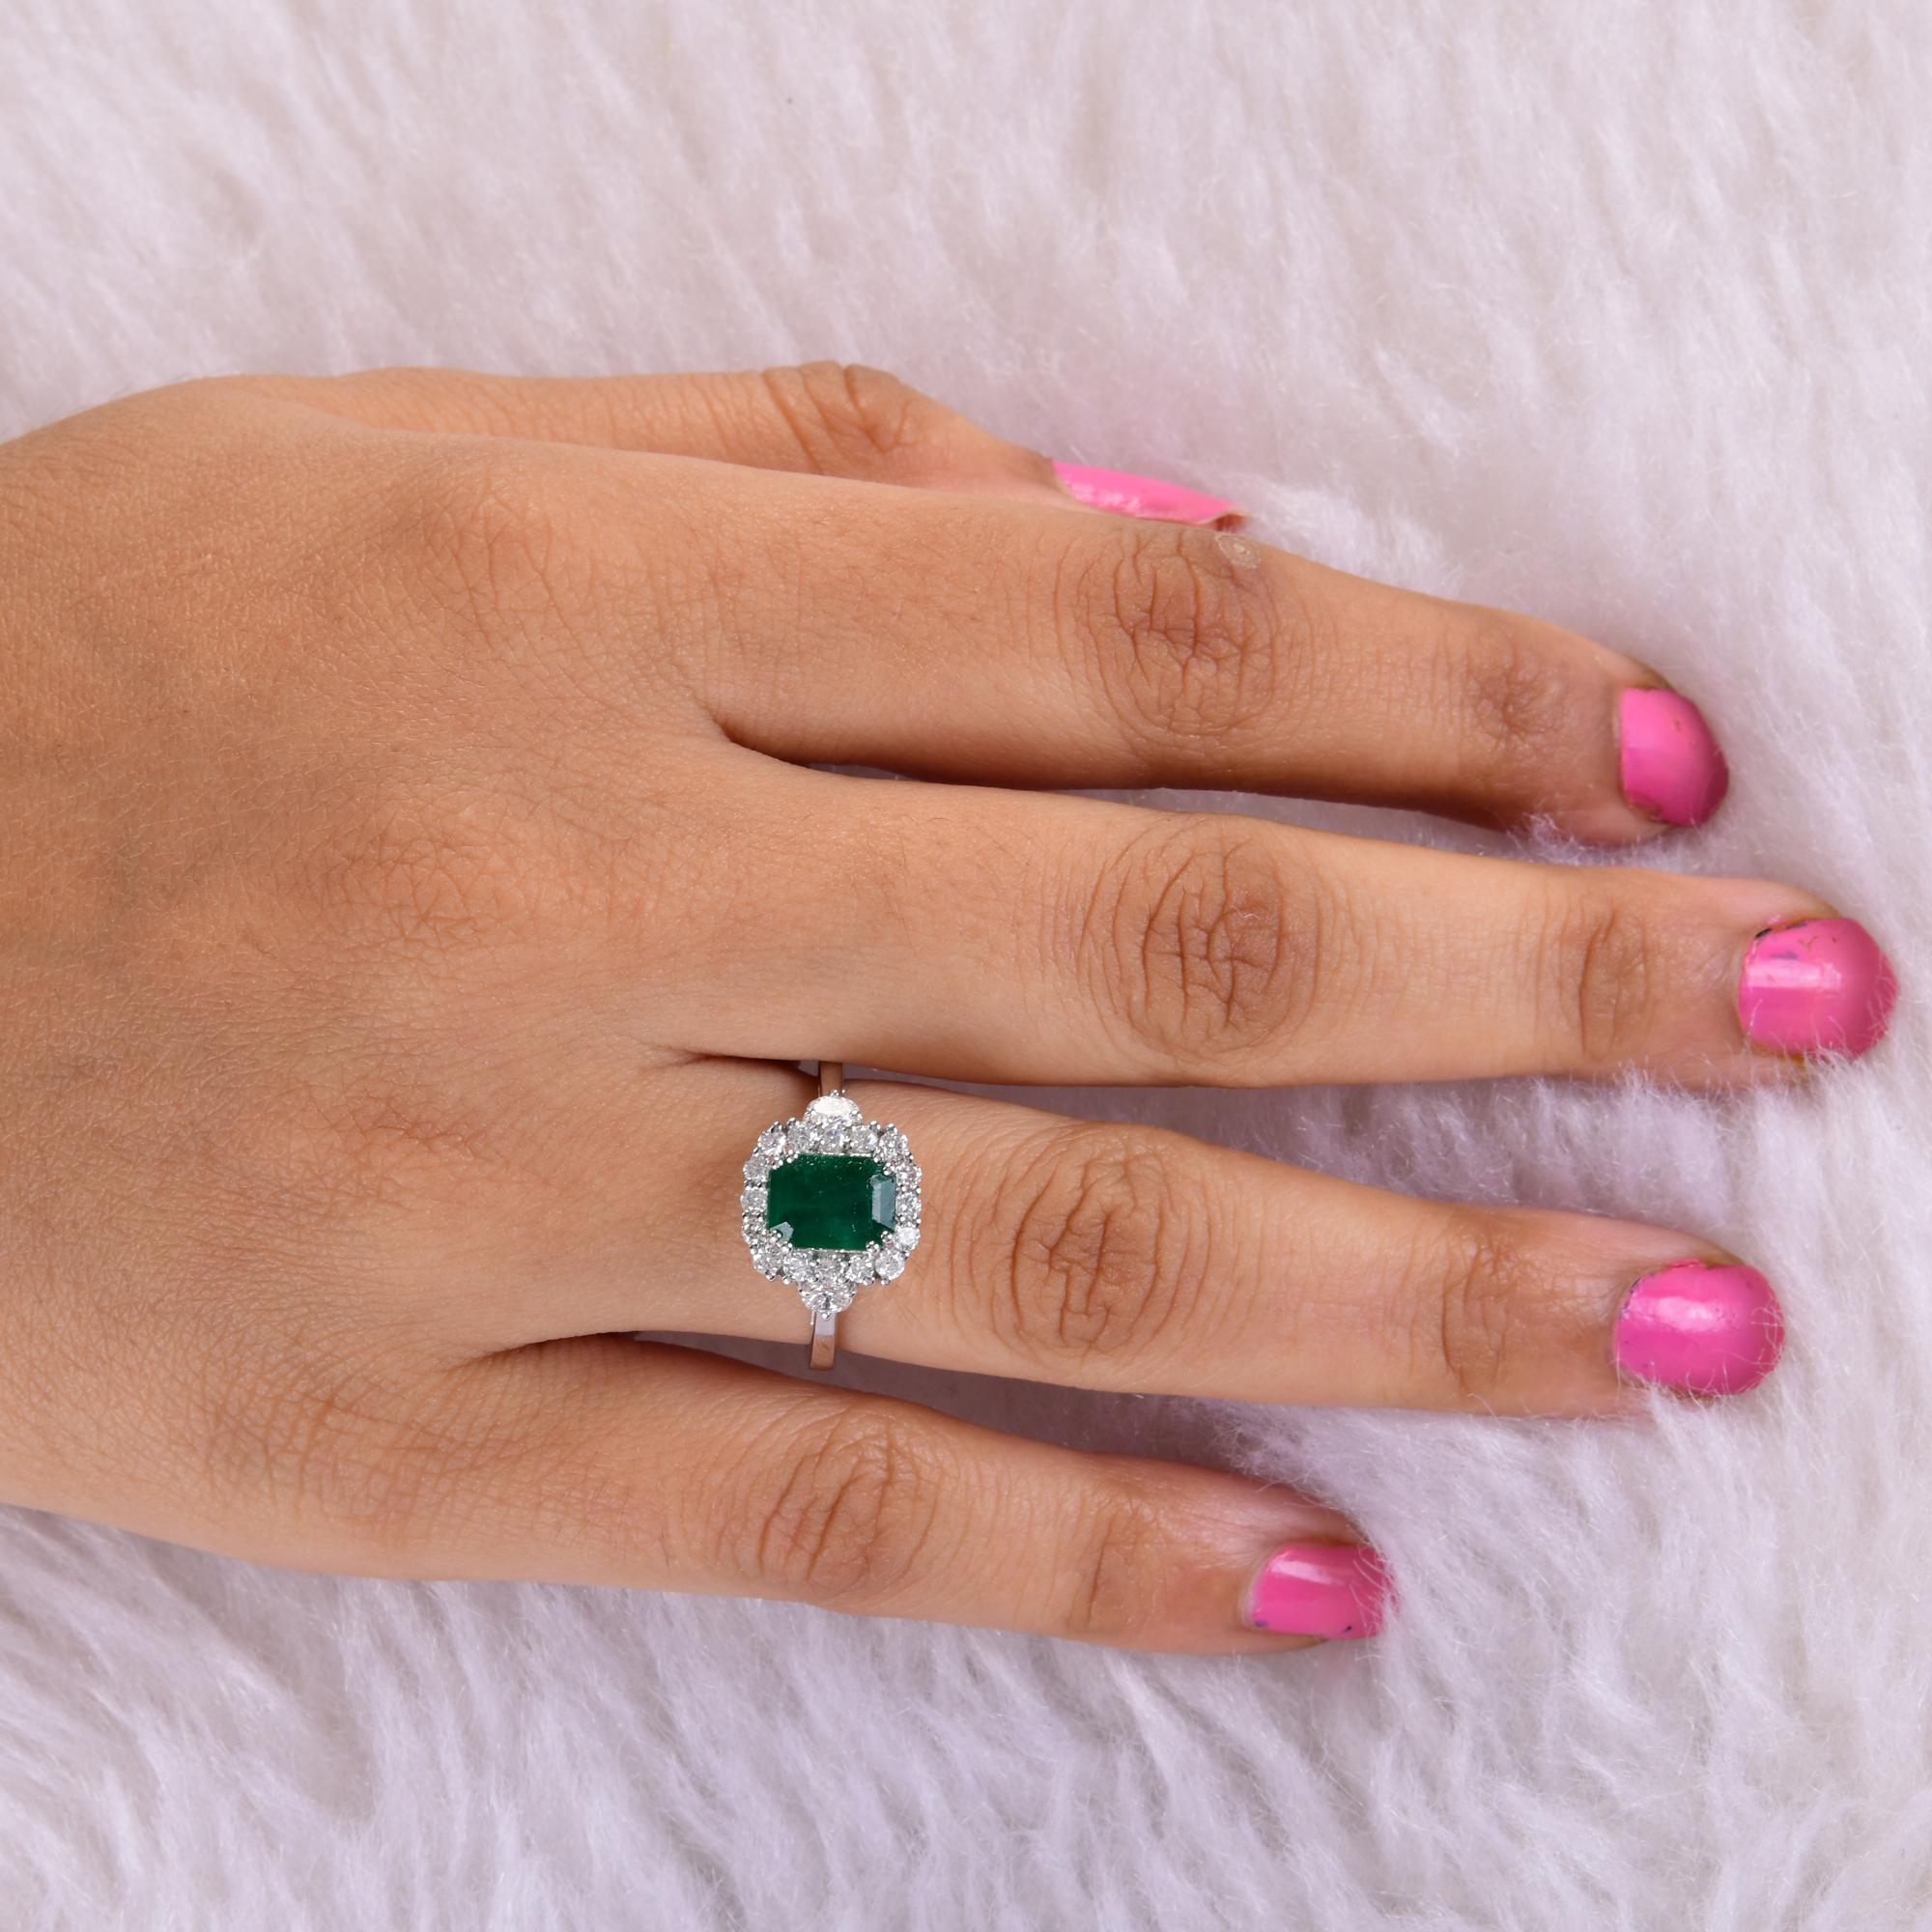 Surrounding the emerald are brilliant diamonds, meticulously set to enhance its beauty and create a dazzling display of light. The diamonds add a touch of glamour and sparkle to the design, accentuating the rich color and clarity of the emerald. Set